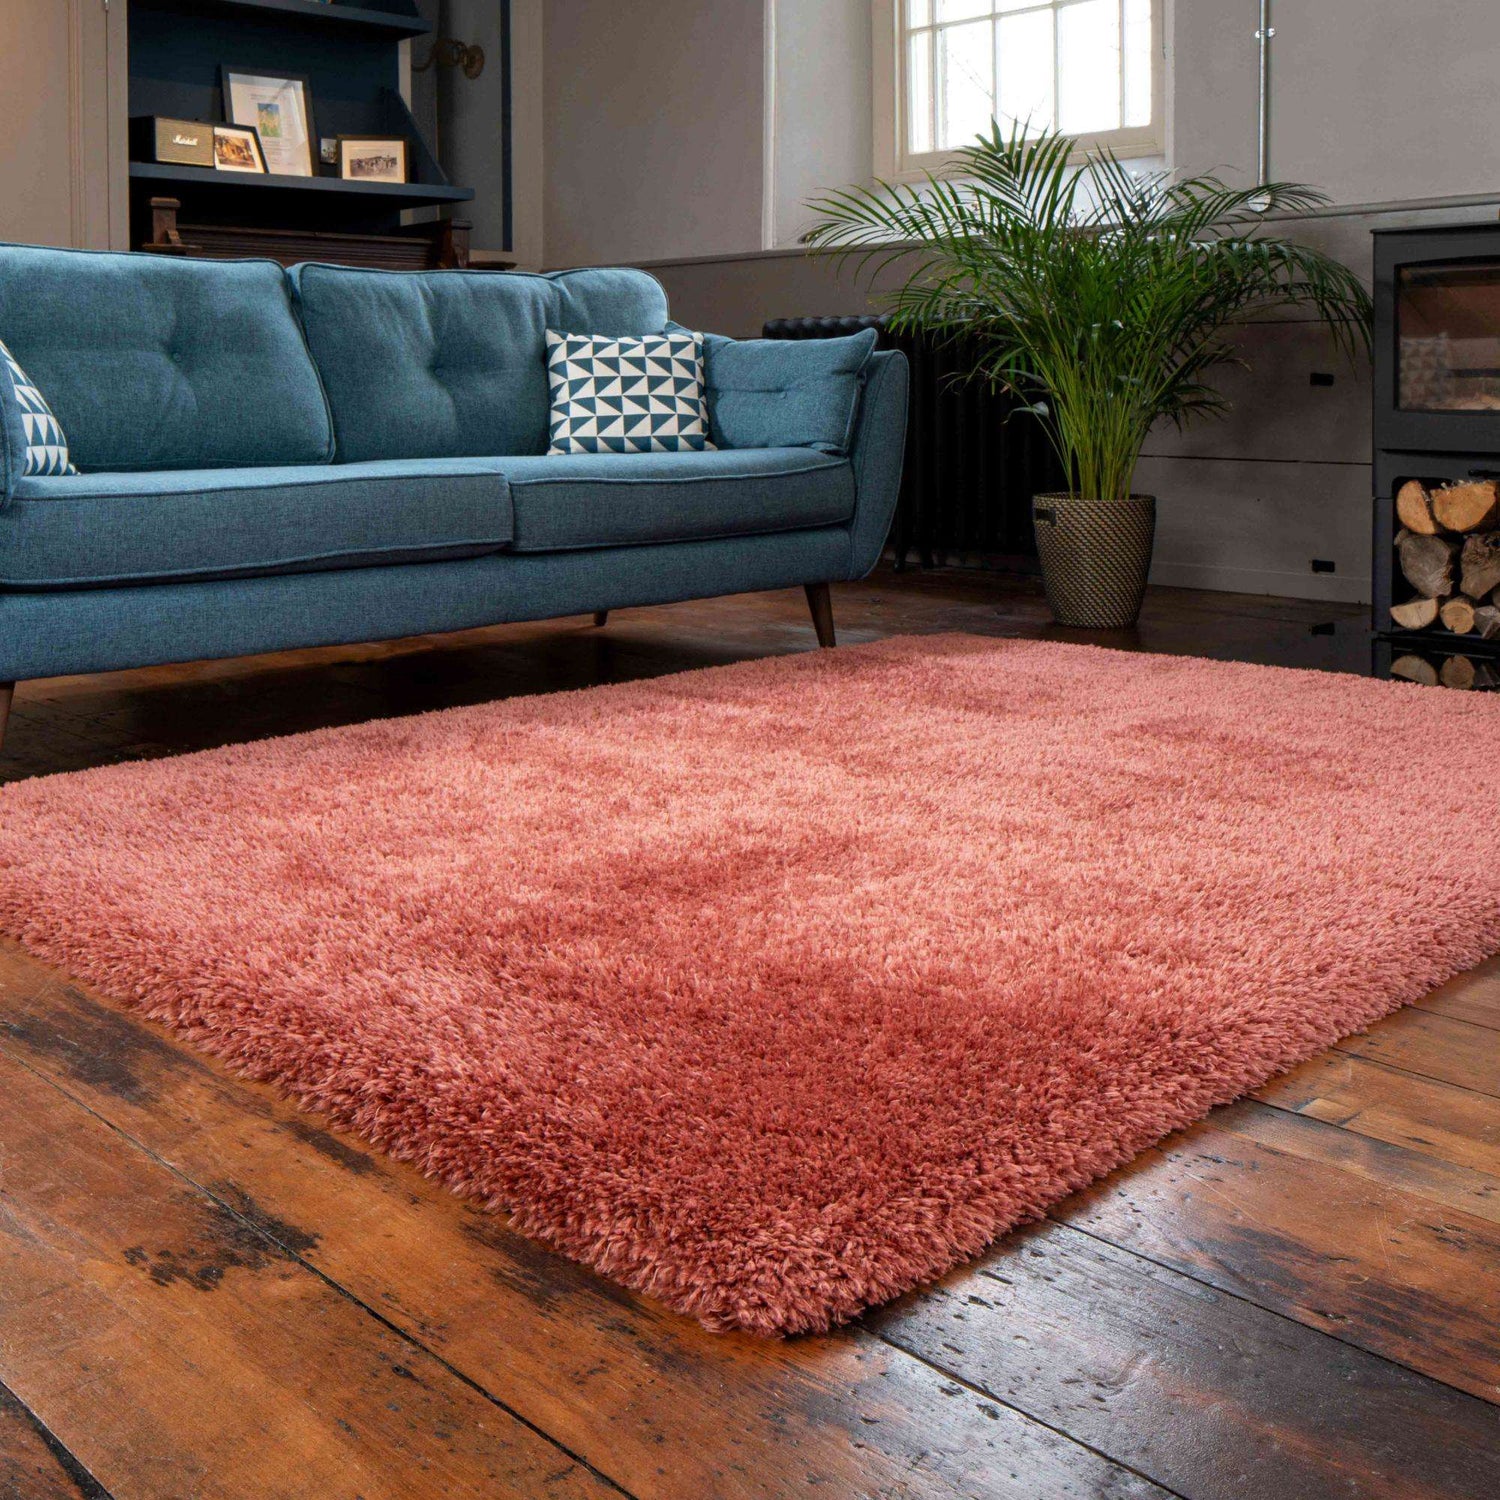 Deluxe Thick Soft Terracotta Shaggy Hall Runner Rug